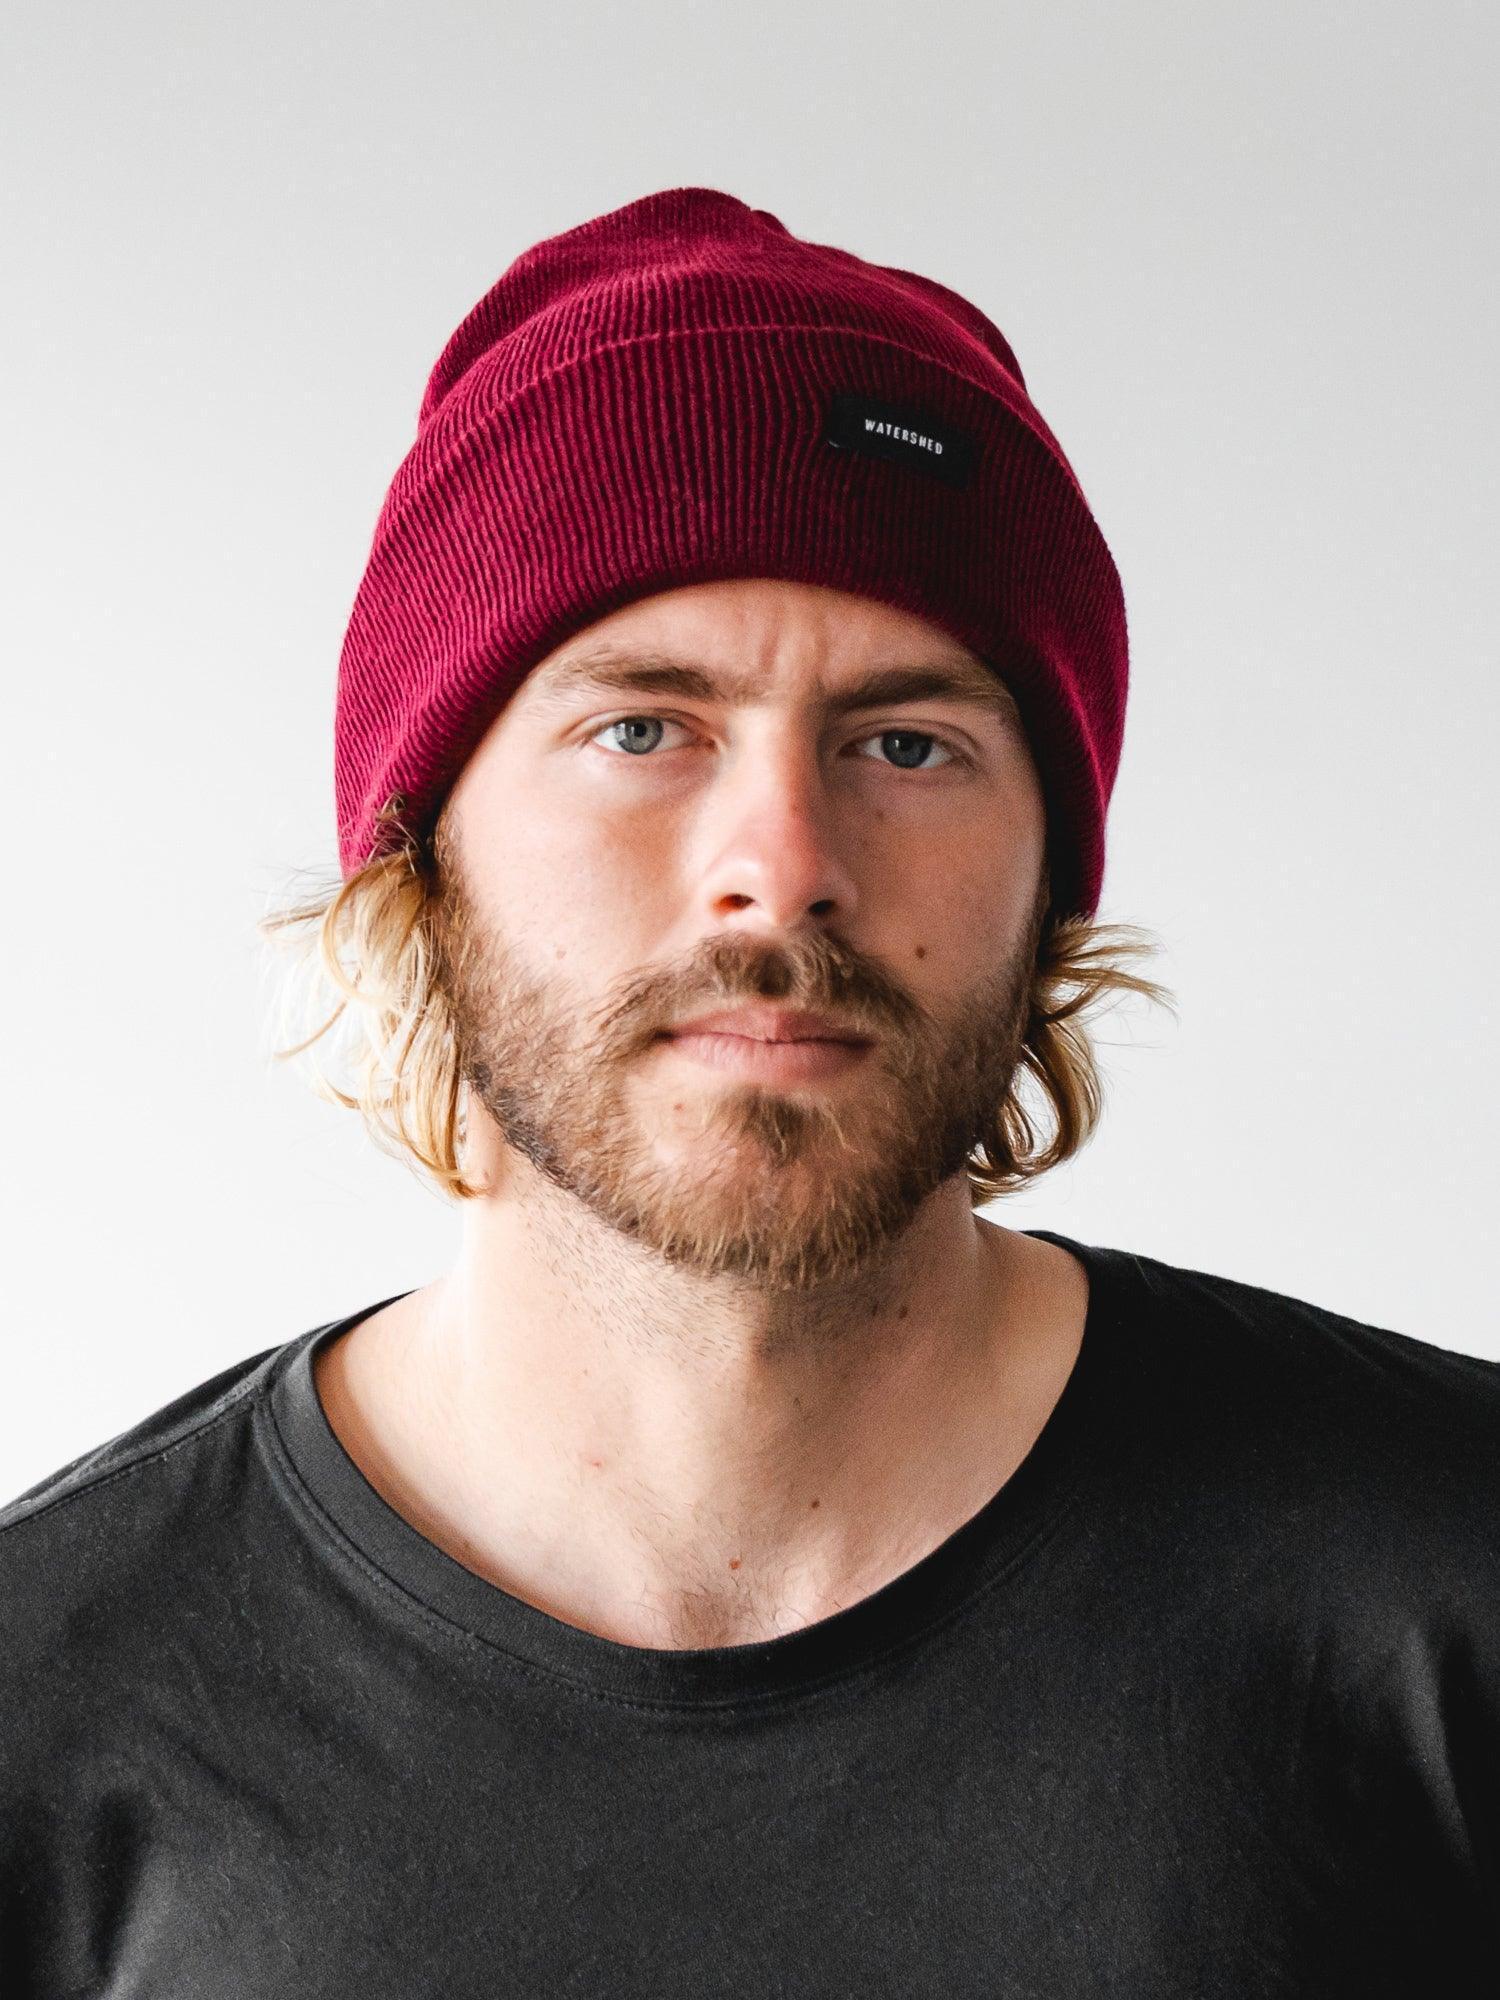 Burgundy Beanie - Stay cozy and stylish with this fashionable burgundy beanie, perfect for any occasion.